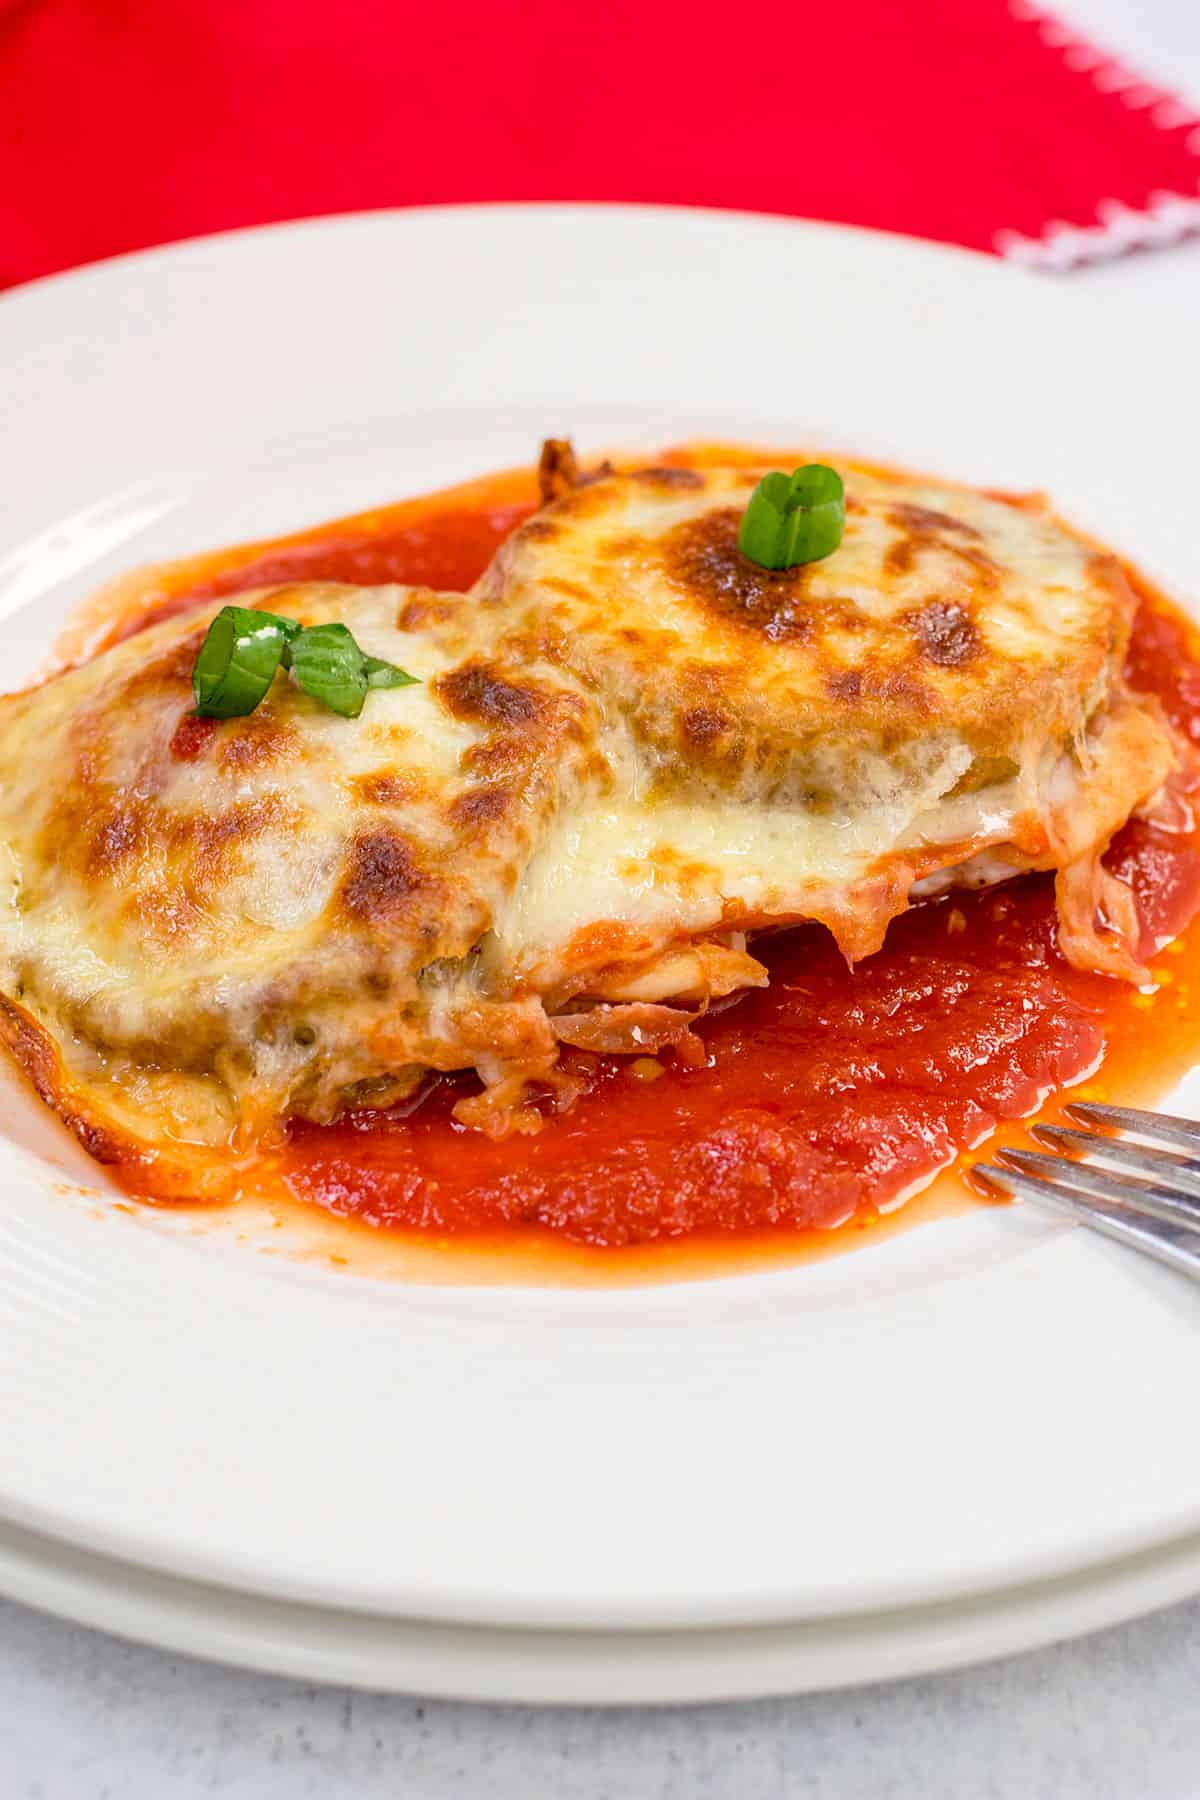 chicken with eggplant and melted cheese on plate of tomato sauce